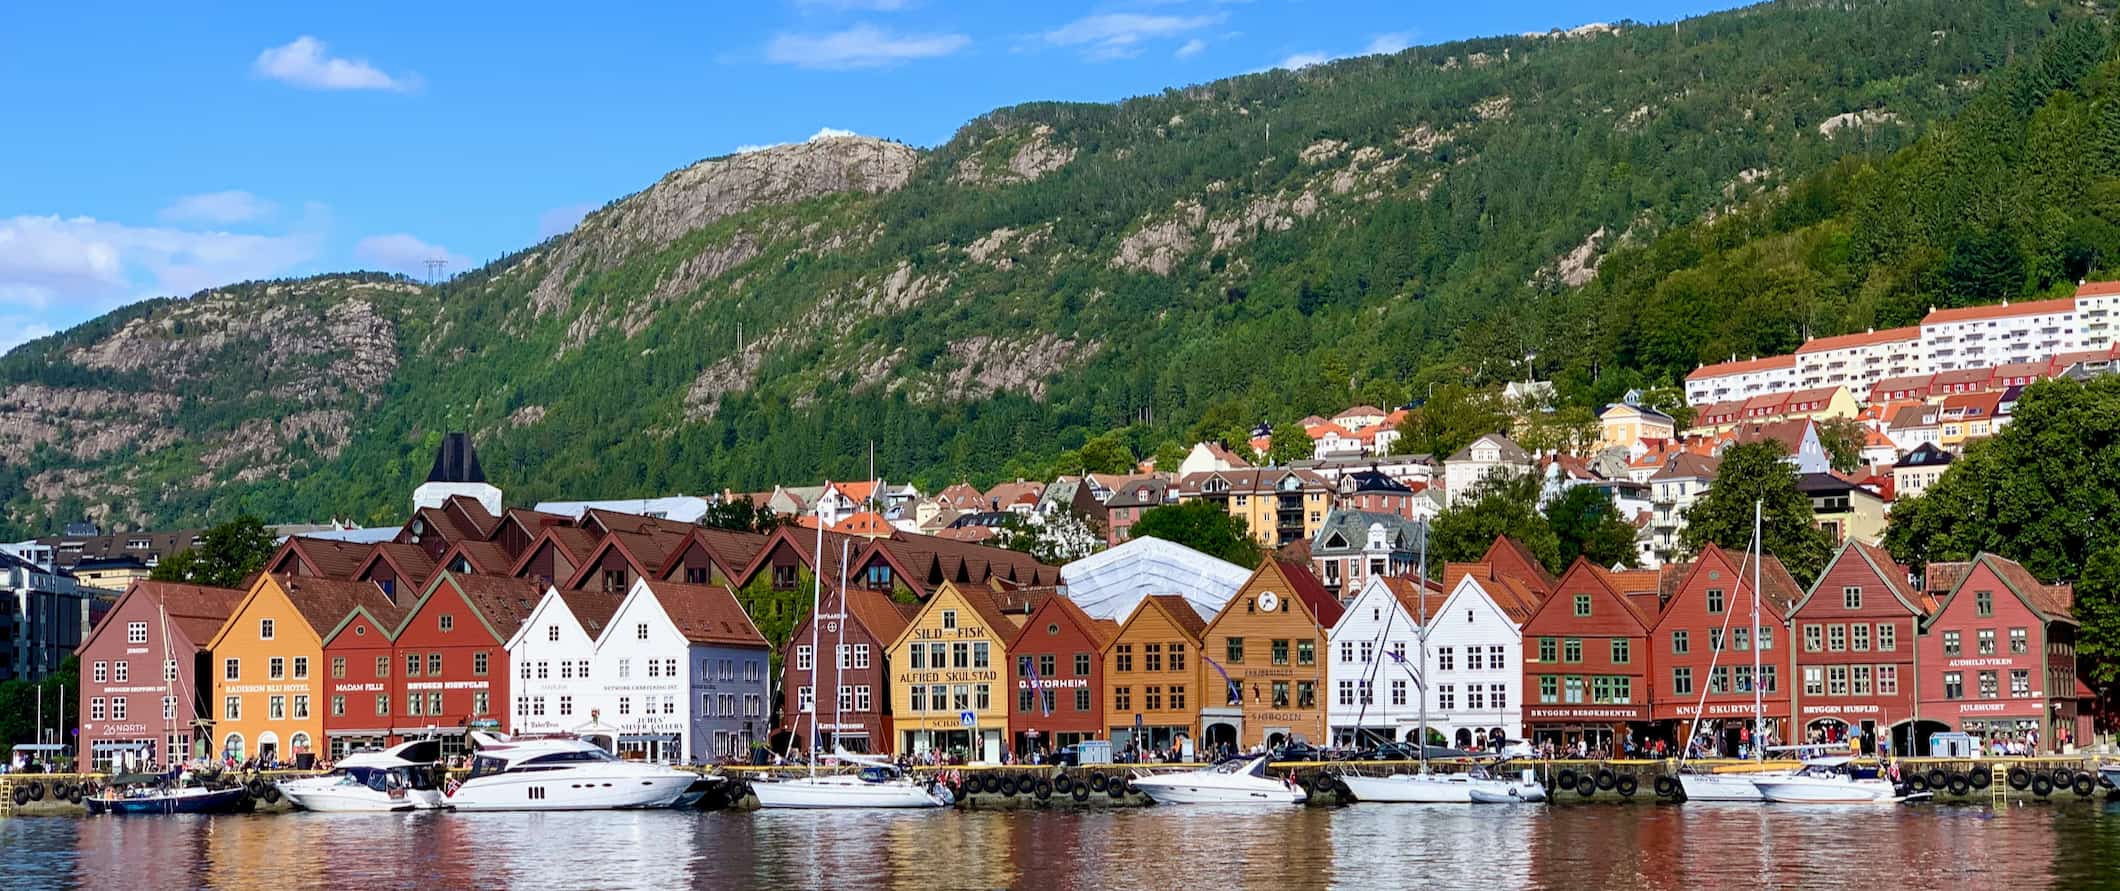 A row of colorful old buildings along the calm shores of Bergen, Norway 